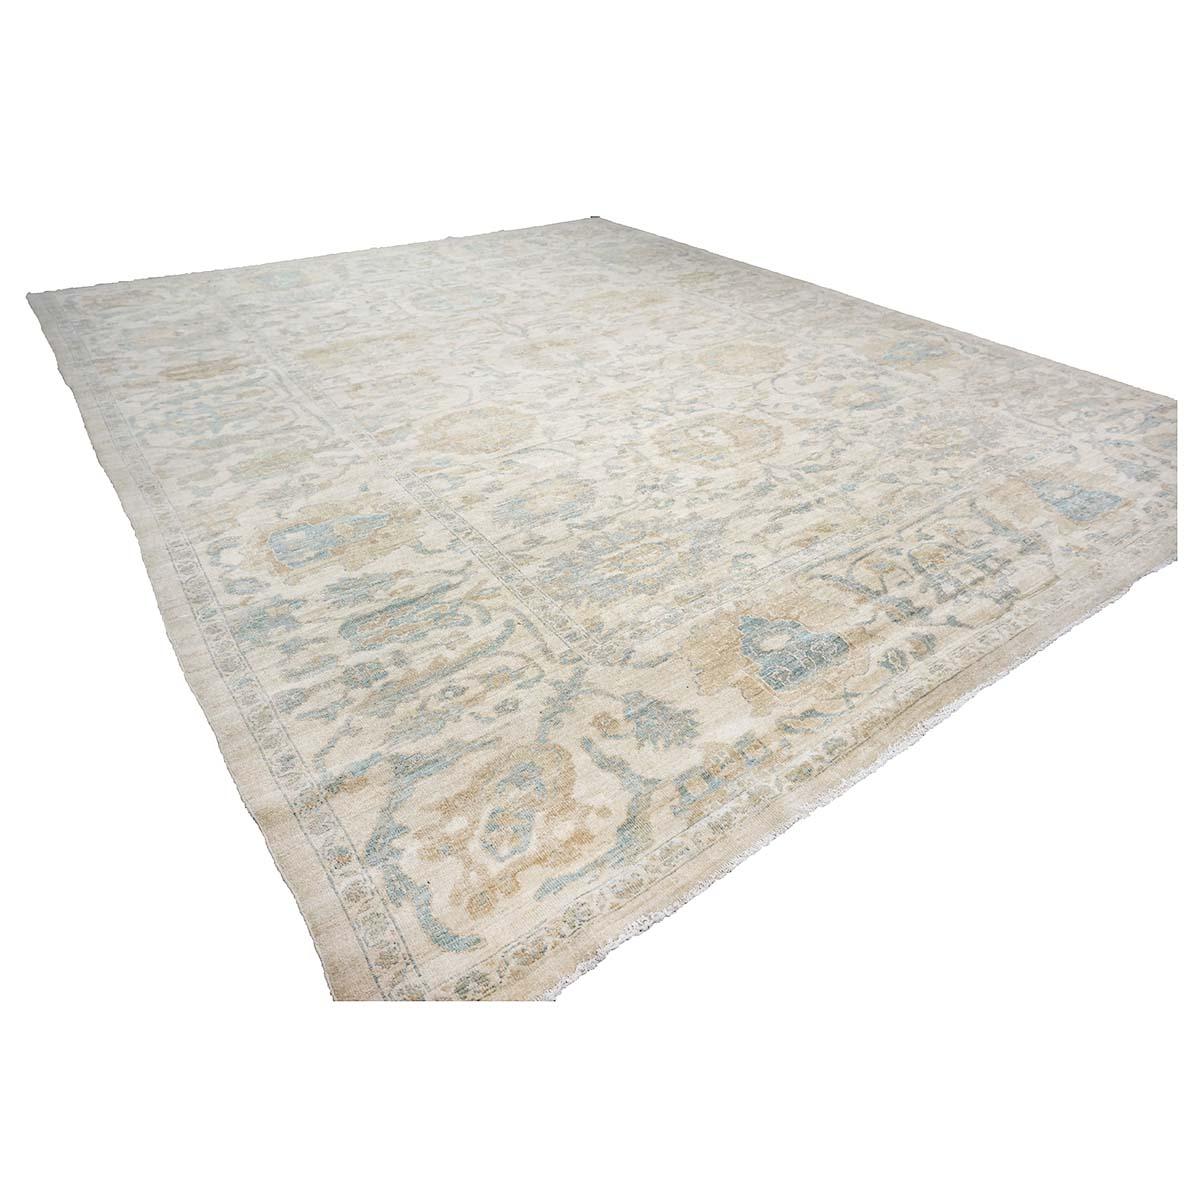 Ashly Fine Rugs presents an antique recreation of an original Persian Sultanabad 12x14 Ivory & Tan Handmade Area Rug. Part of our own previous production, this antique recreation was thought of and created in-house and 100% handmade in Iran by